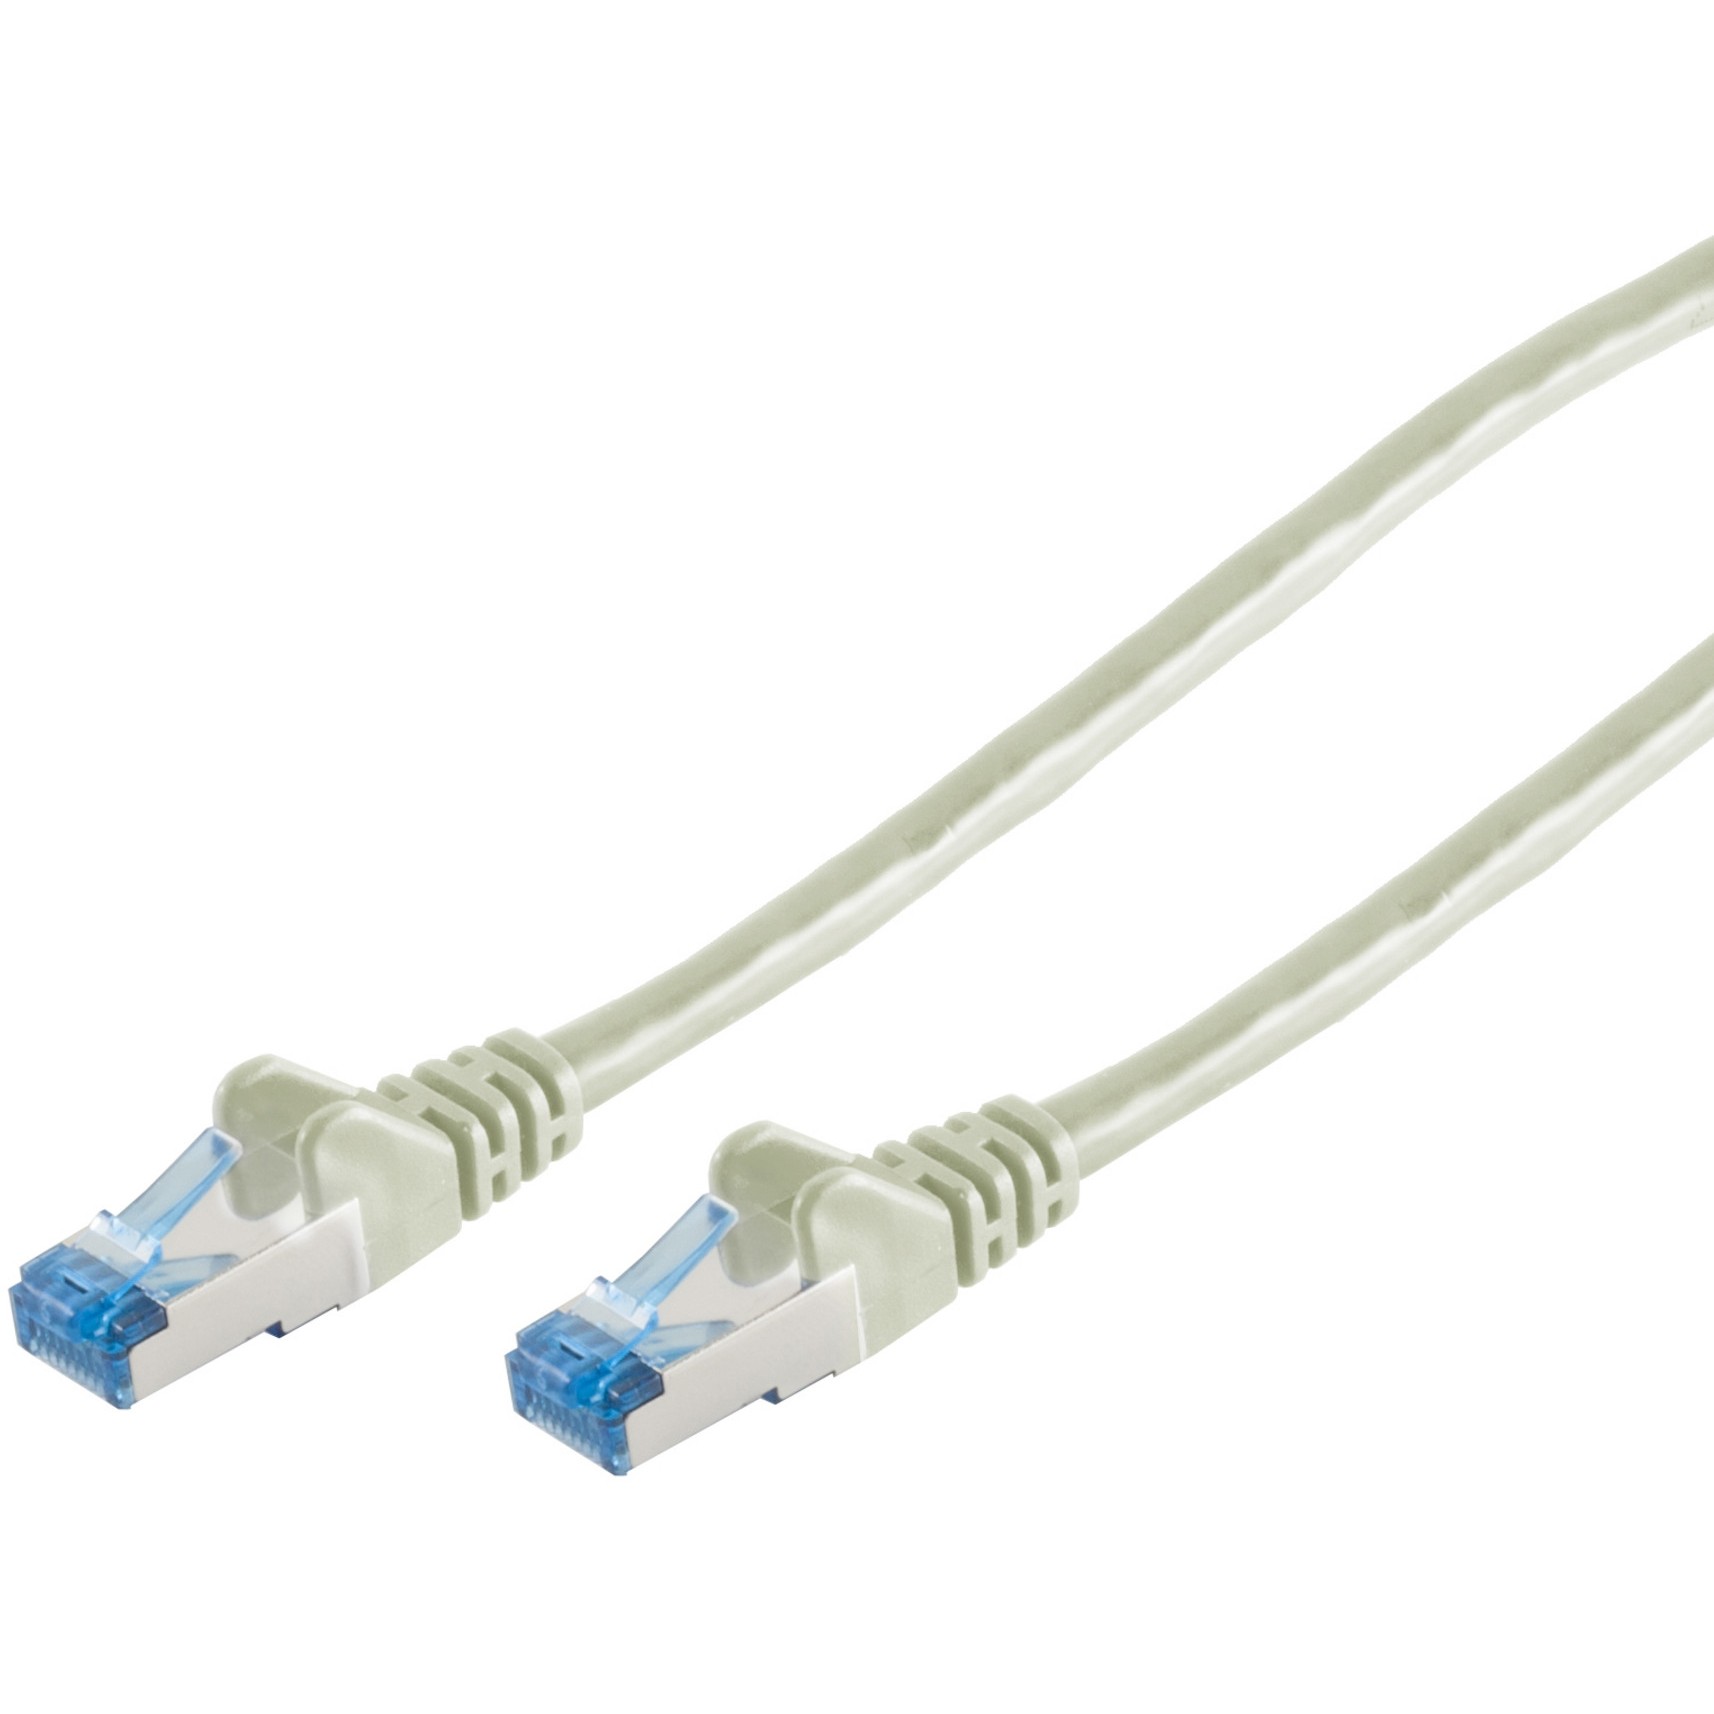 S-Conn 75712 networking cable - 75712